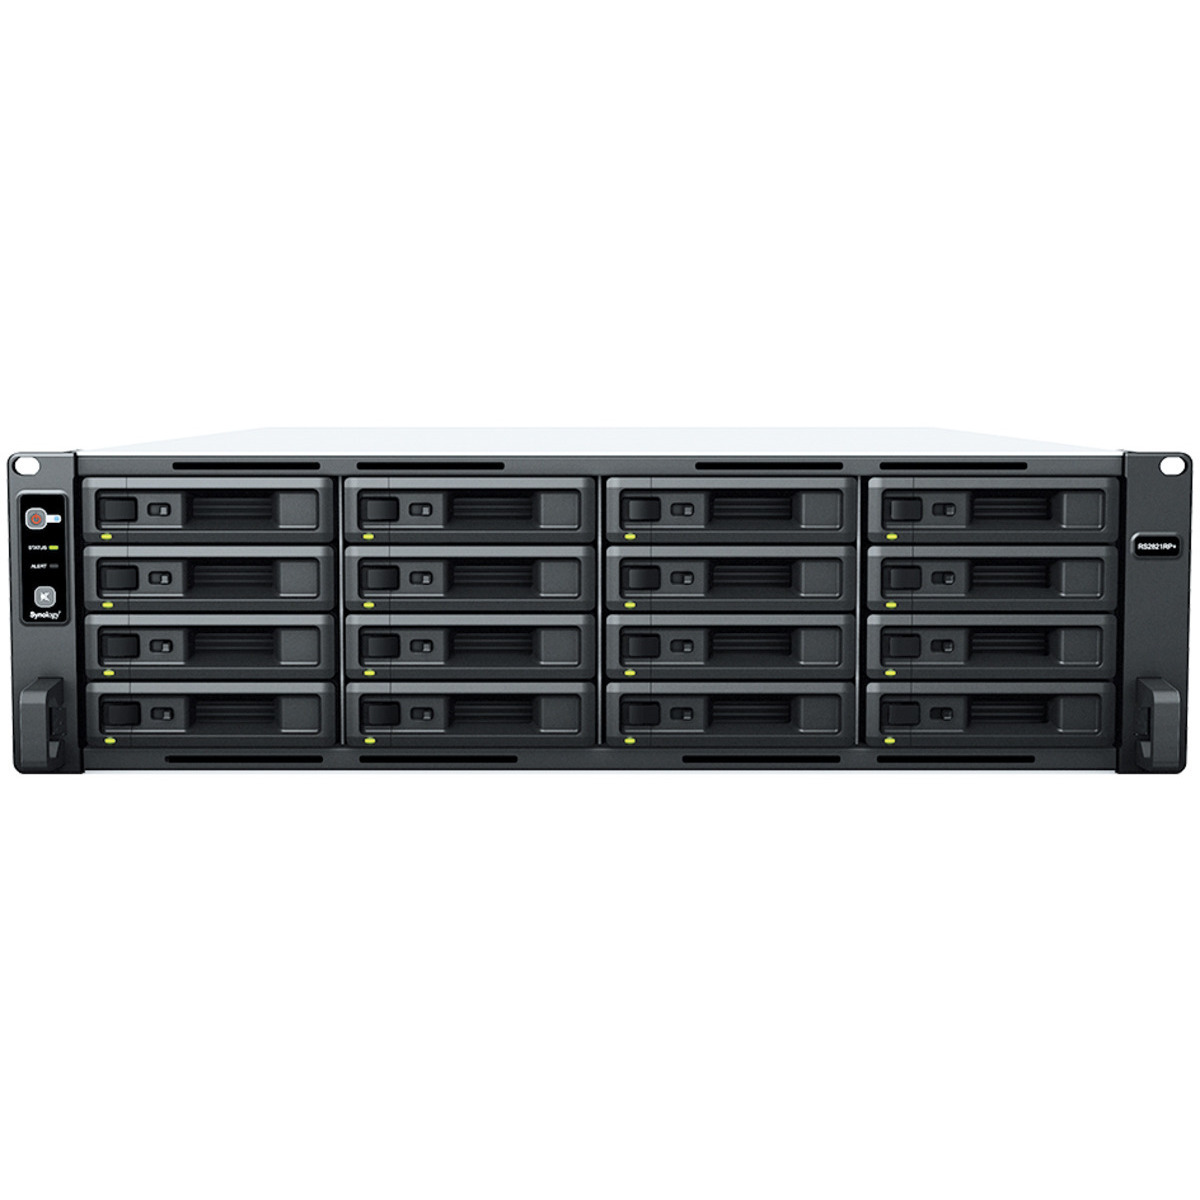 buy $11184 Synology RackStation RS2821RP+ 288tb RackMount NAS - Network Attached Storage Device 16x18000gb Toshiba Enterprise Capacity MG09ACA18TE 3.5 7200rpm SATA 6Gb/s HDD ENTERPRISE Class Drives Installed - Burn-In Tested - nas headquarters buy network attached storage server device das new raid-5 free shipping usa christmas new year holiday sale RackStation RS2821RP+